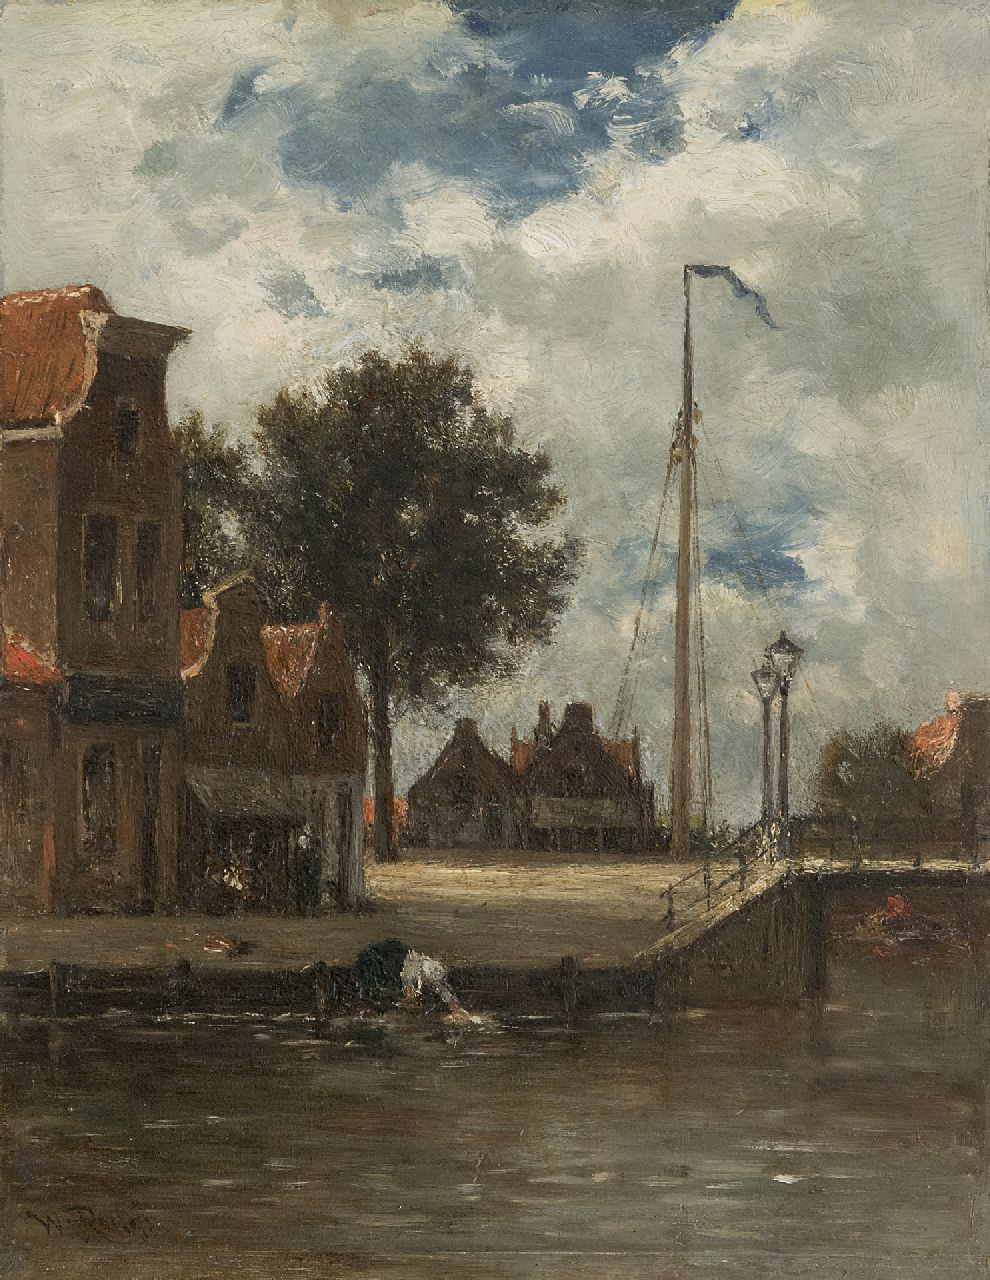 Roelofs W.  | Willem Roelofs, A vilage canal with a woman doing her laundry (possibly Edam), oil on panel 31.5 x 24.5 cm, signed l.l. and painted ca. 1861-1867